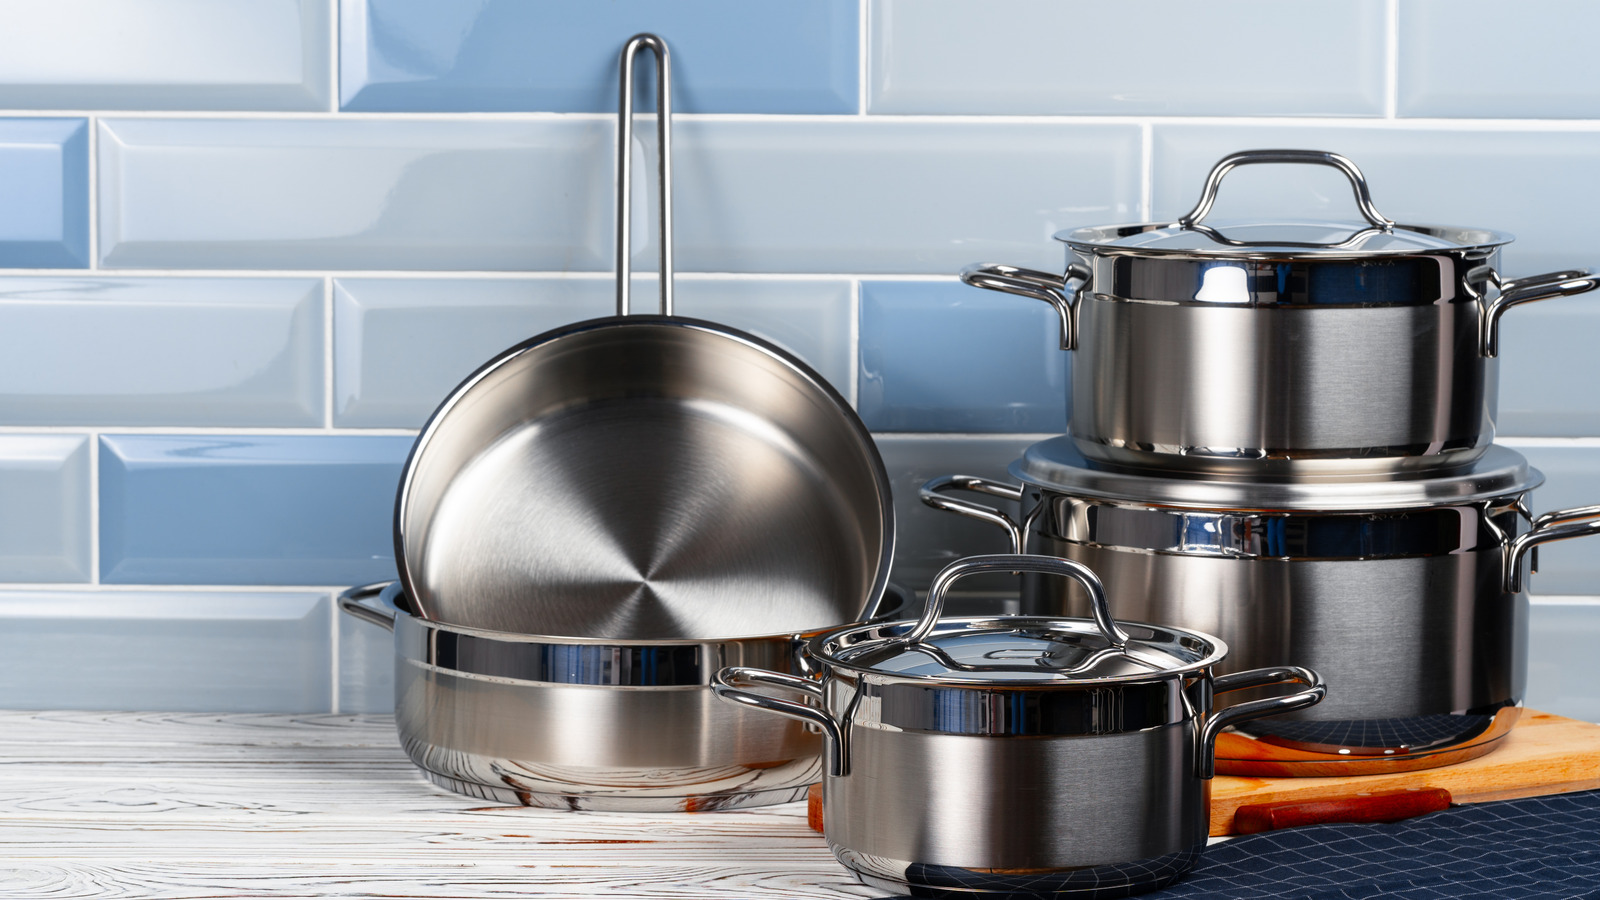 https://www.mashed.com/img/gallery/the-best-stainless-steel-cookware-sets-of-2022/l-intro-1658167255.jpg